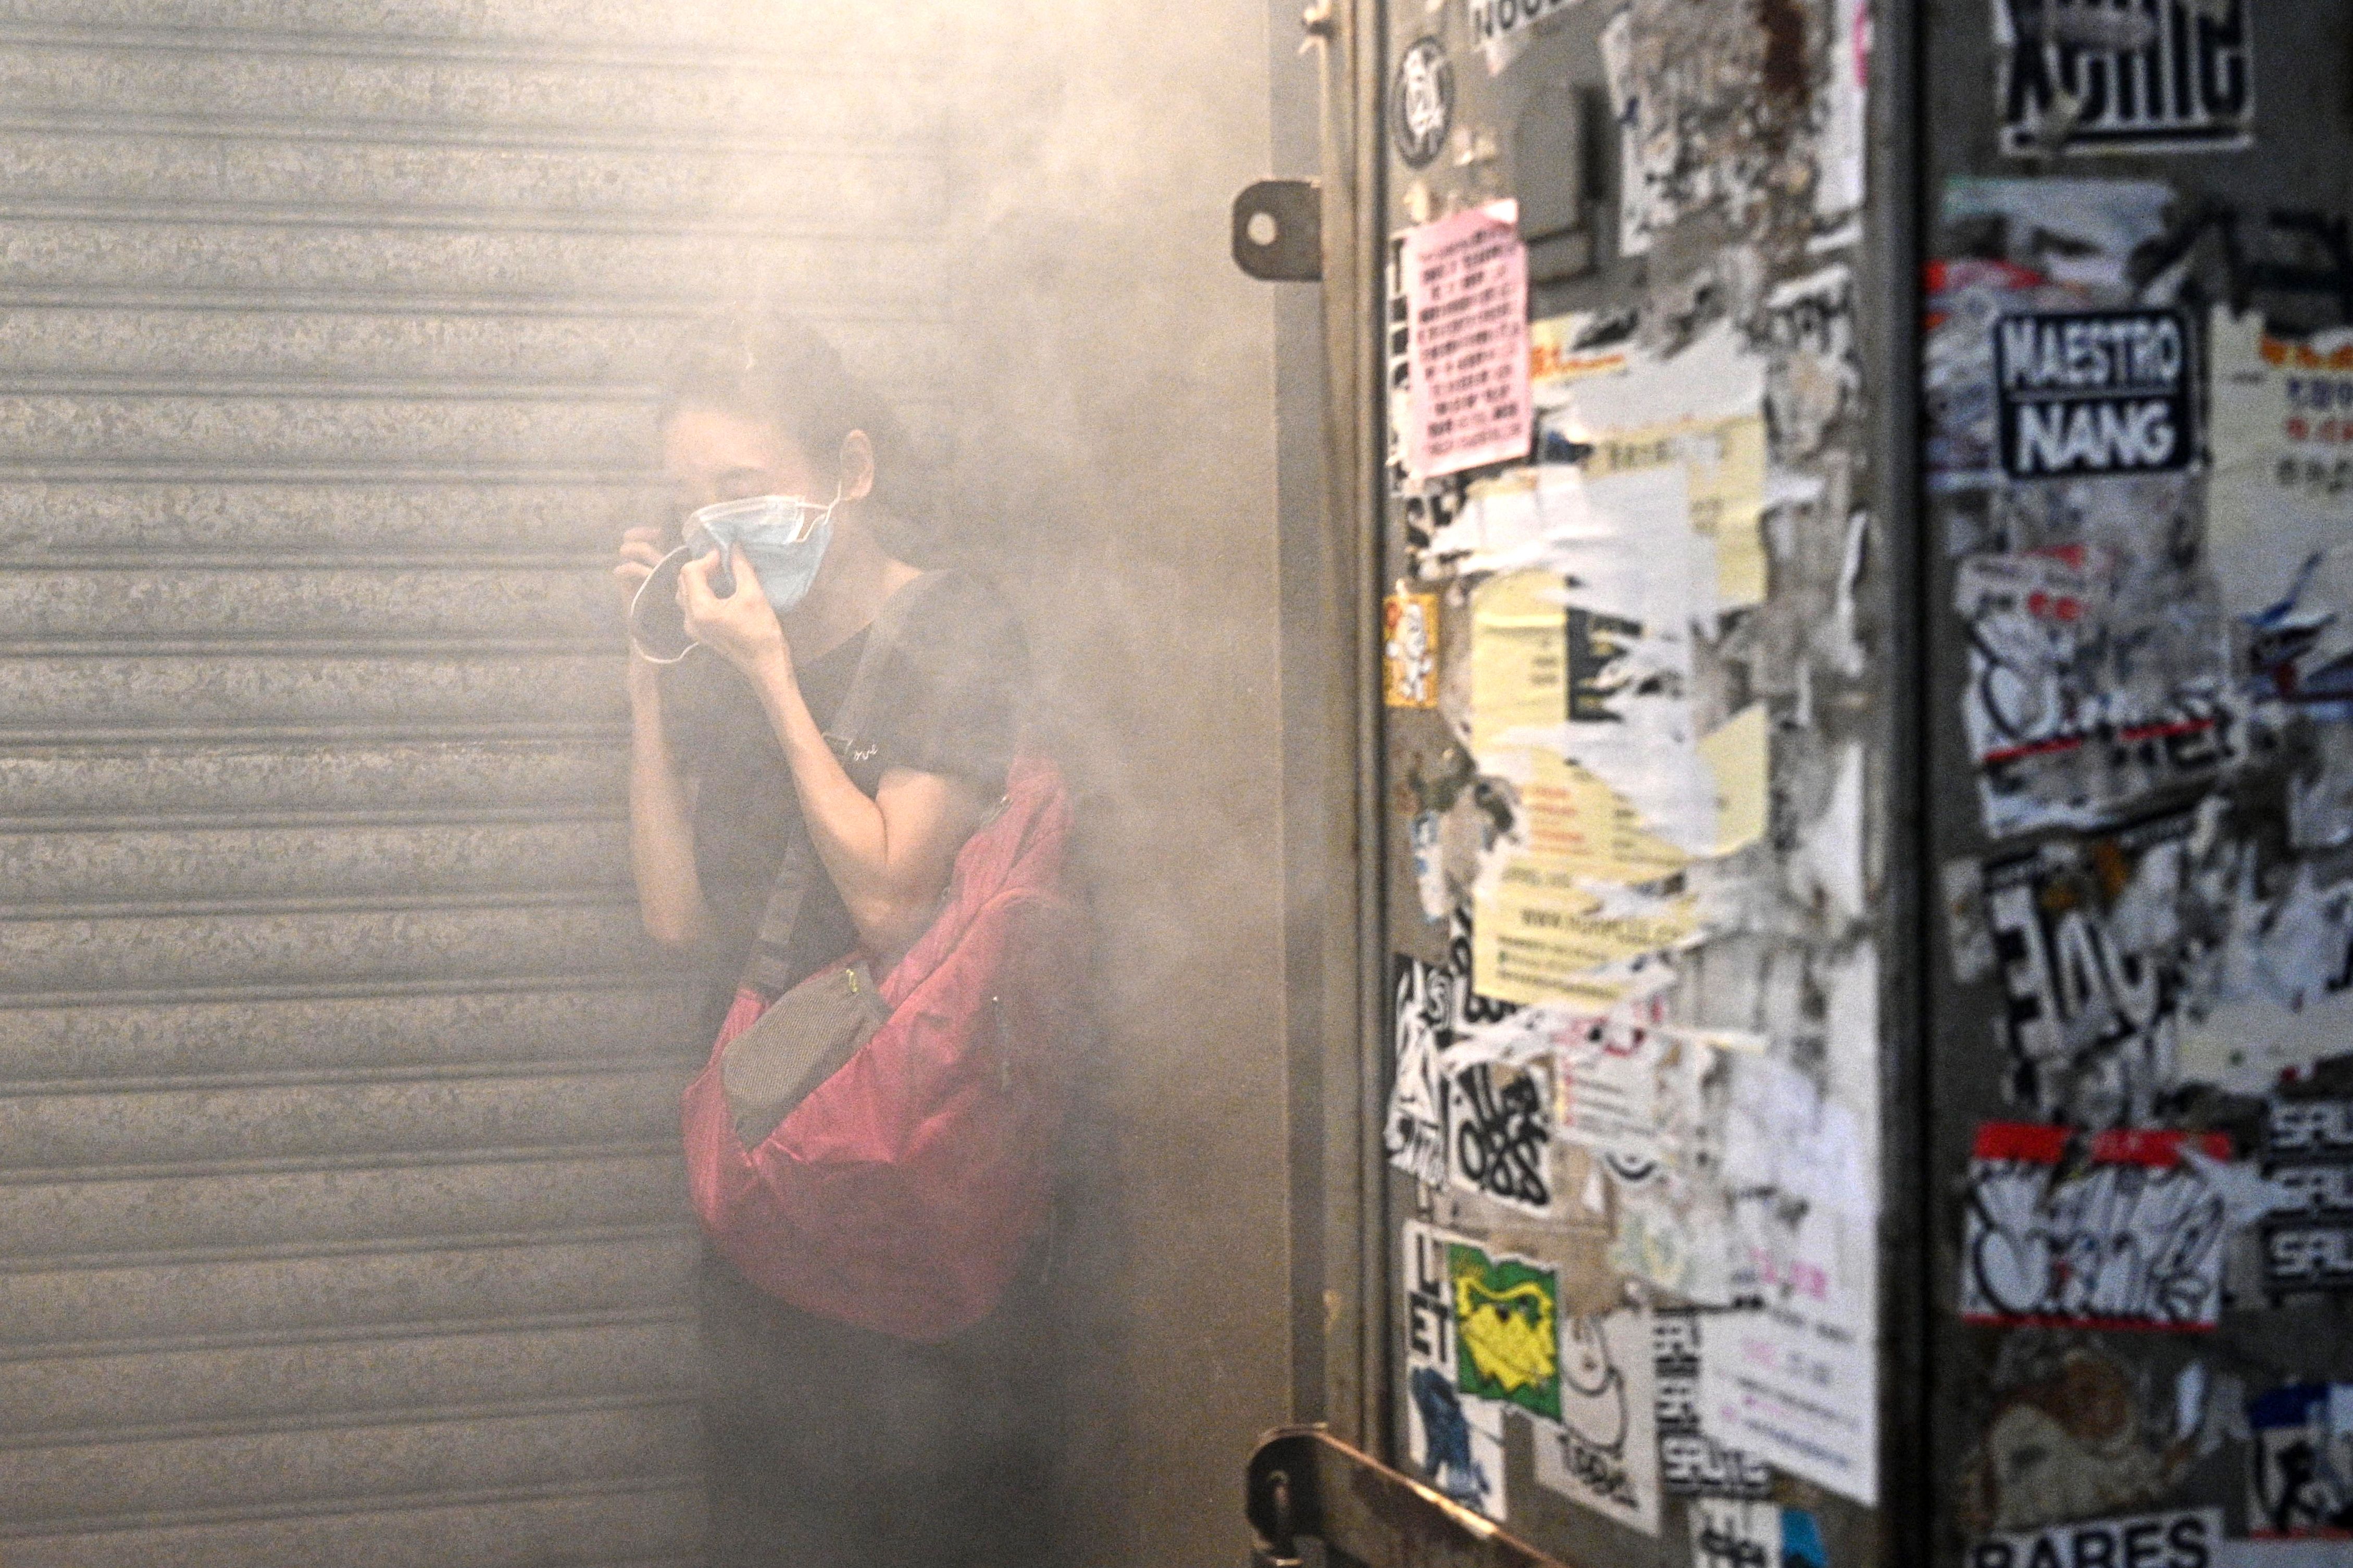 Hong Kong riot police fired tear gas and water cannons at the pro-democracy protesters.